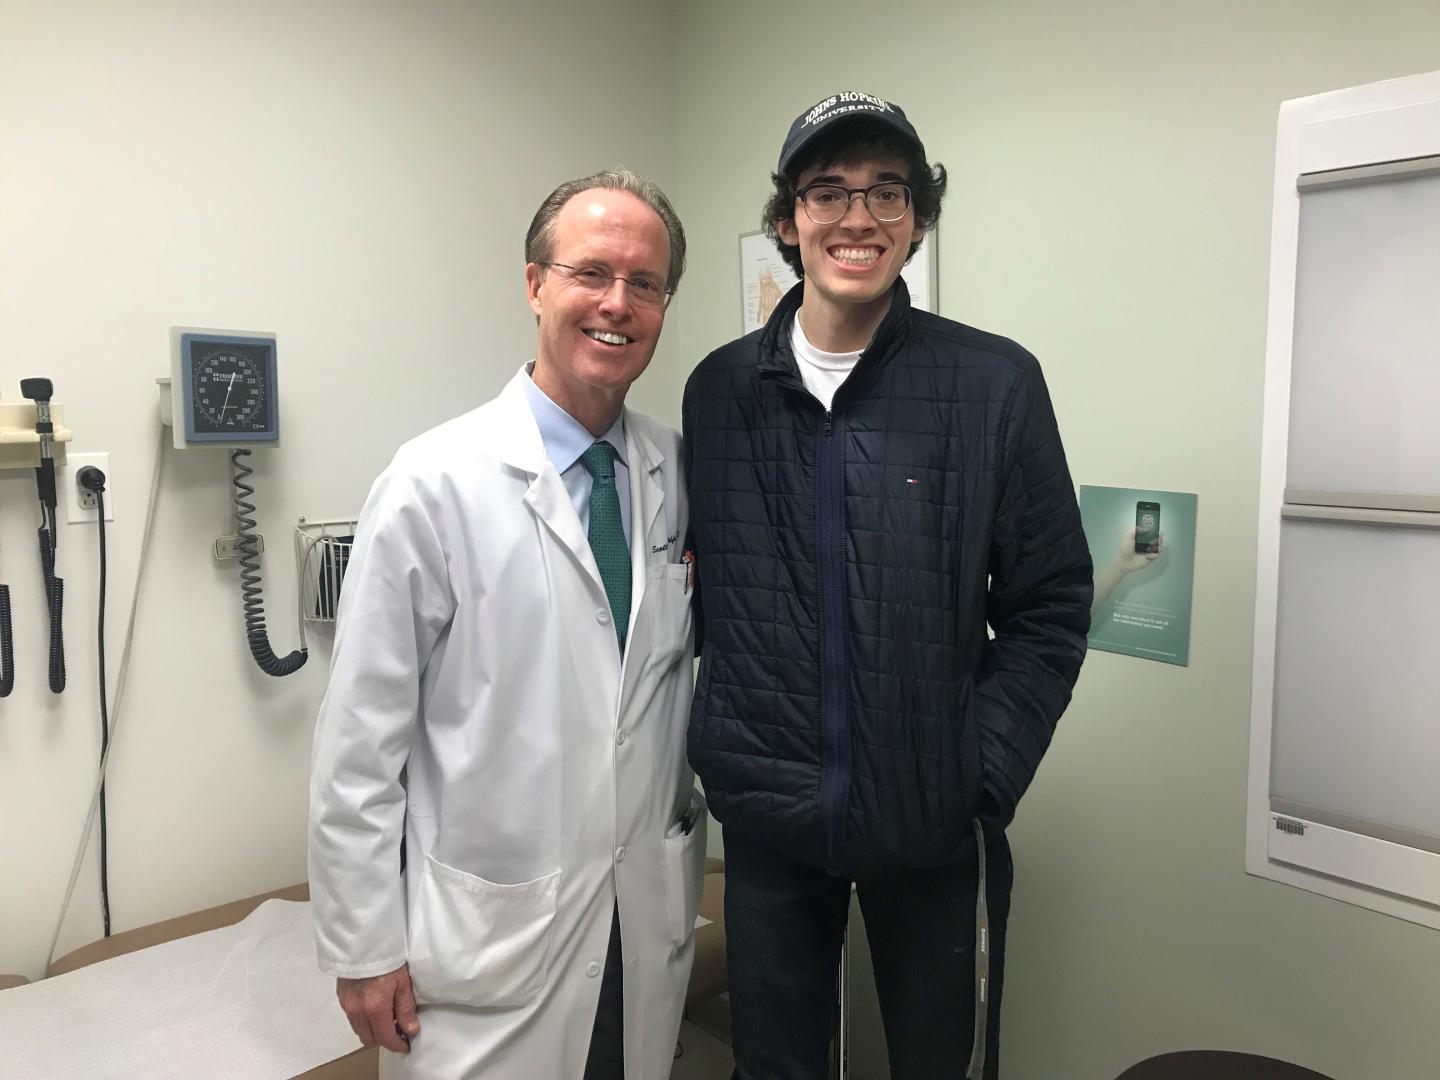 Dr. Scott Wolfe and Kale Hyder